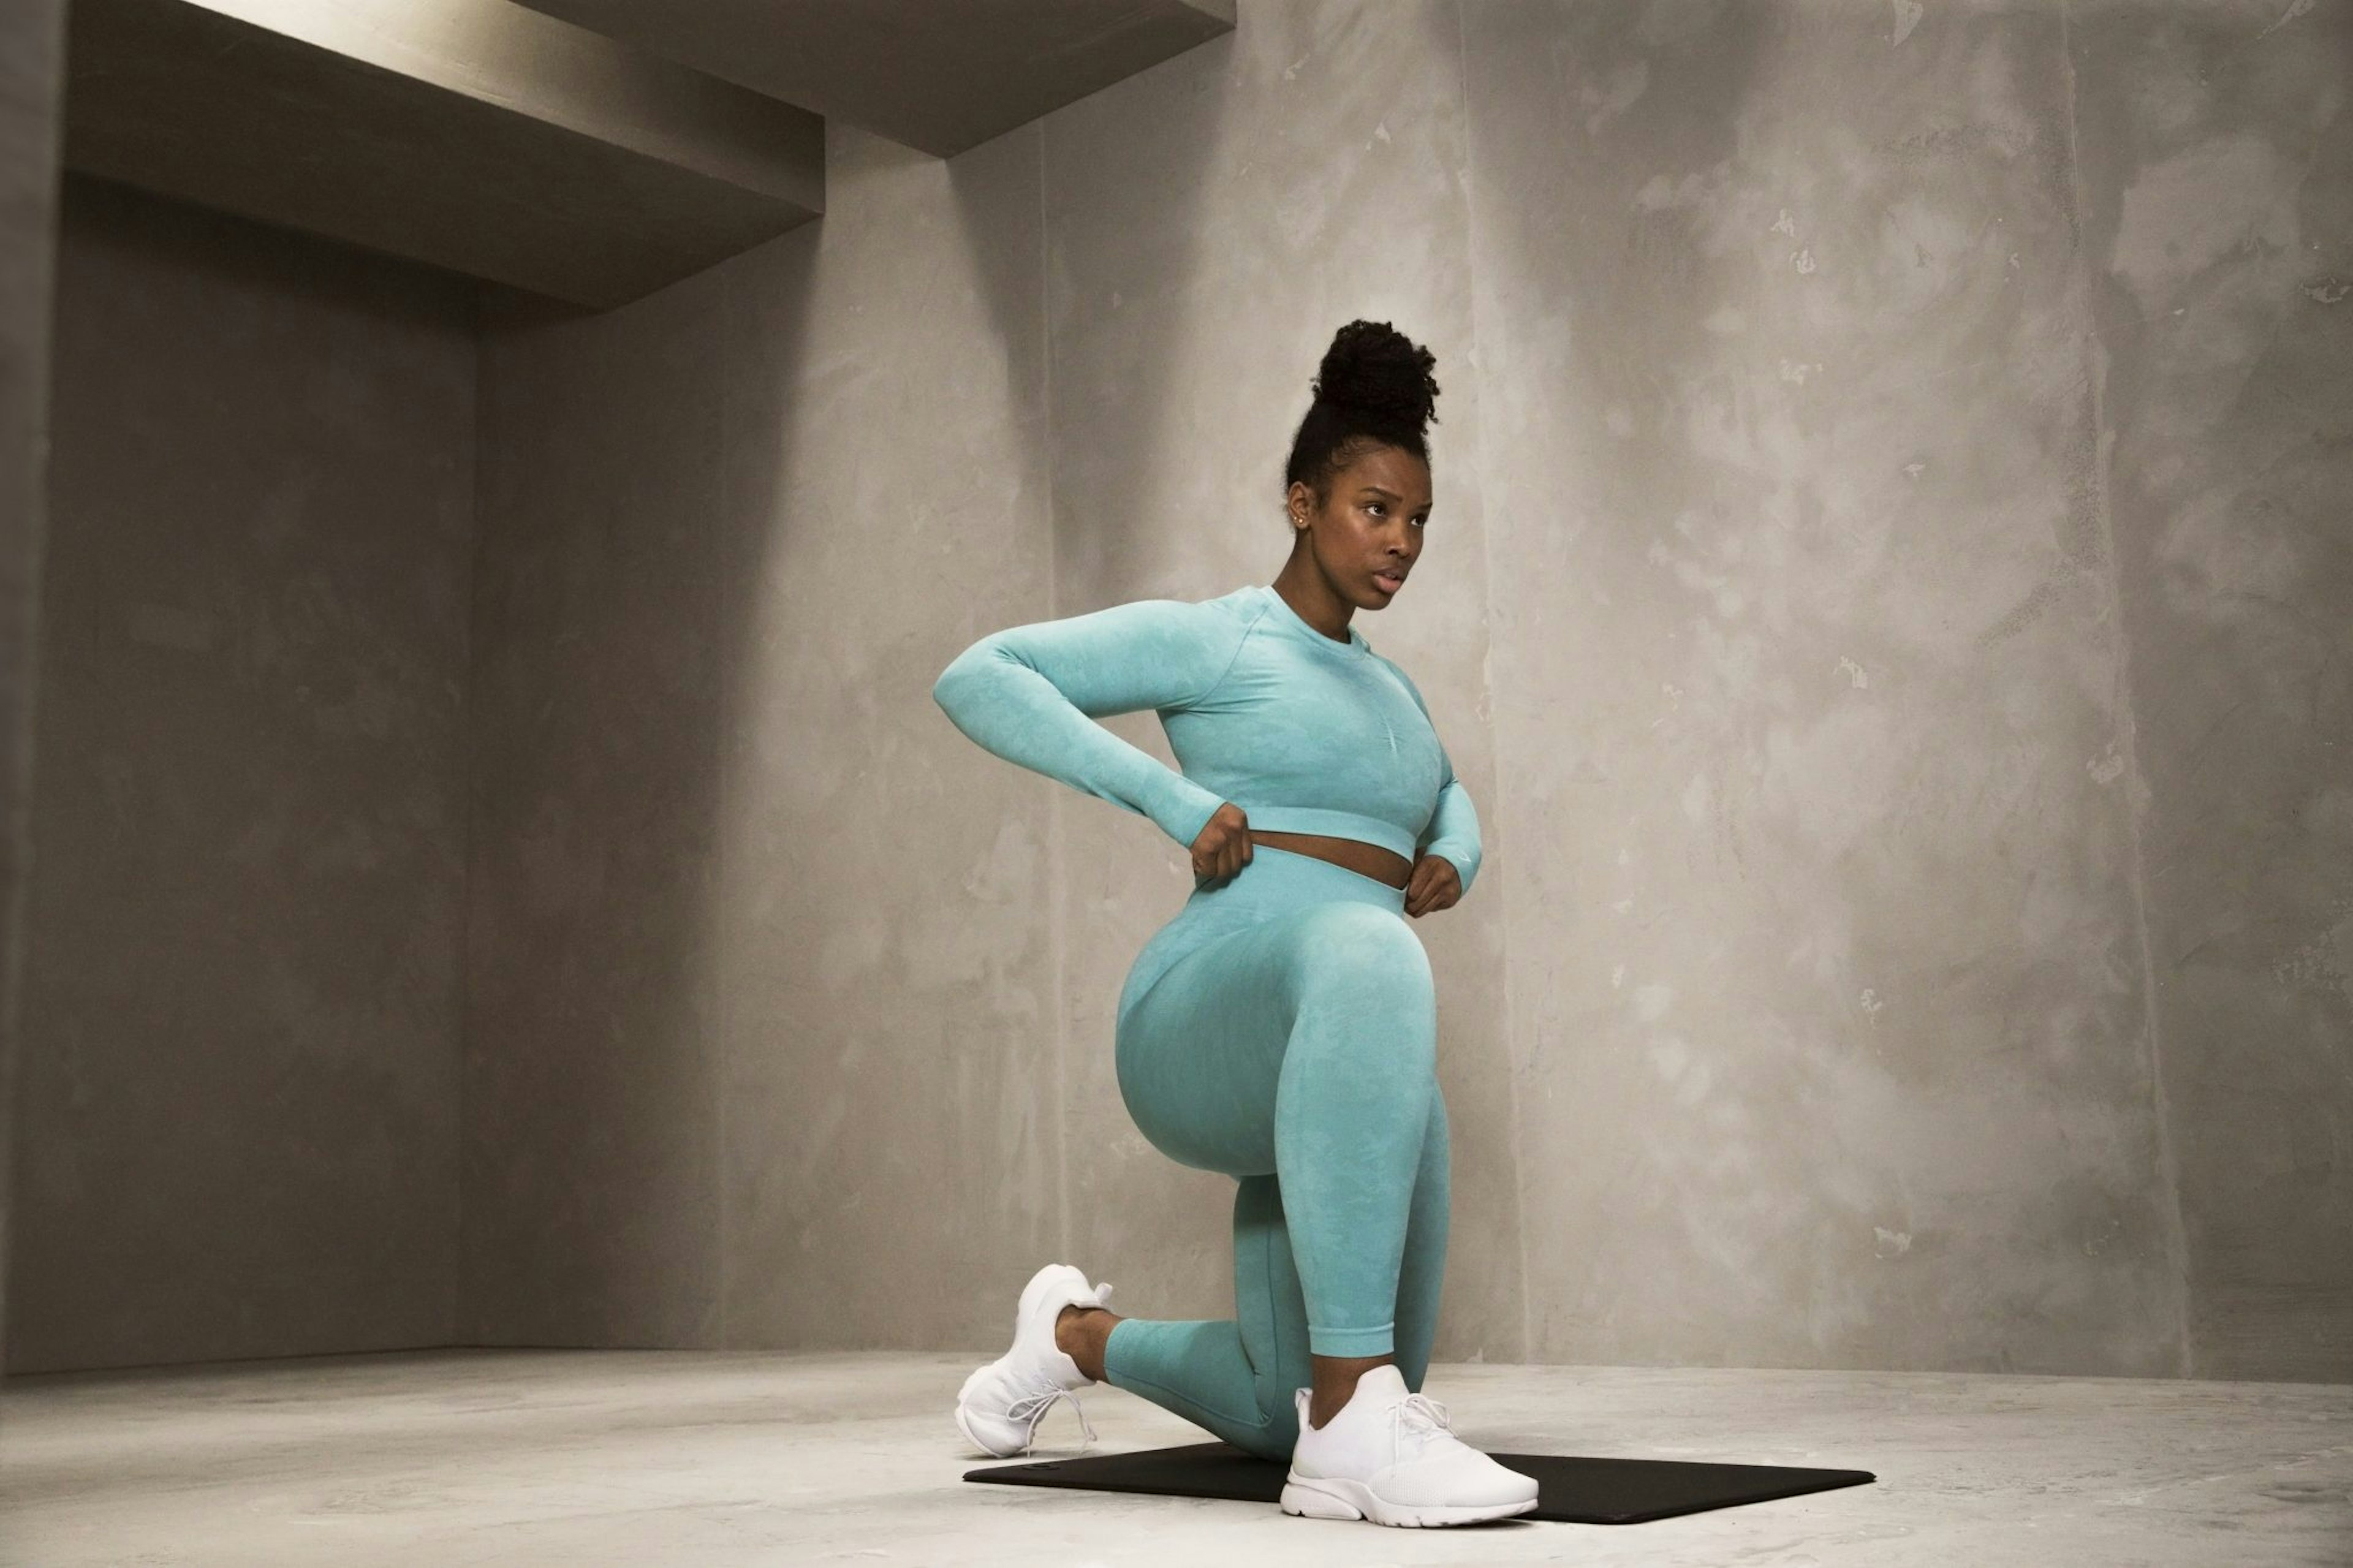 Women's Power – The Lifting collection from Gymshark